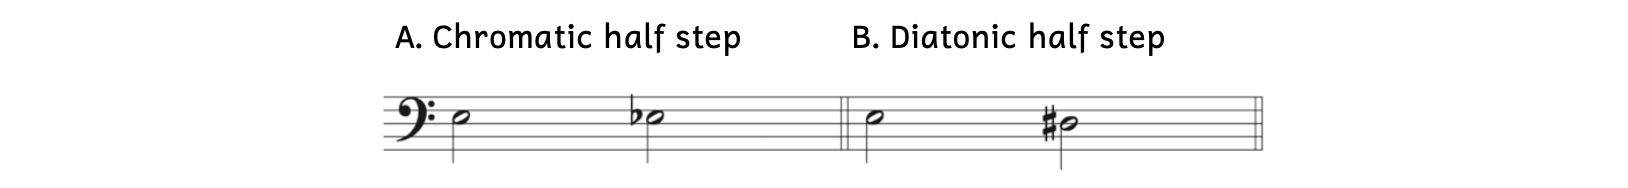 Example of chromatic half step and diatonic half step. Example A shows a chromatic half step between E and E-flat. Example B shows a diatonic half step between E and D-sharp.